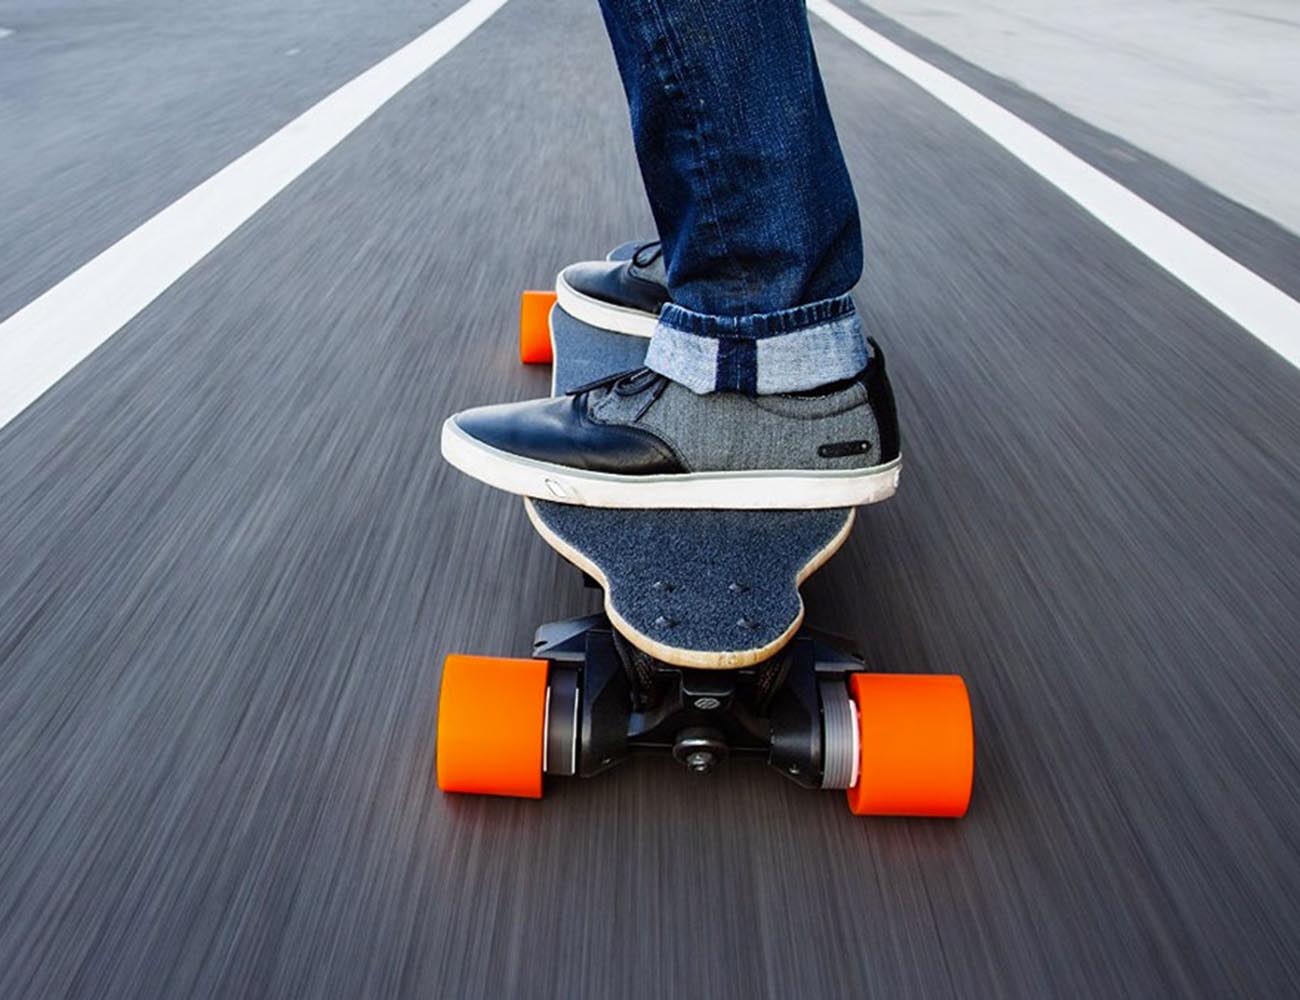 Boosted Dual+ 2000W Electric Skateboard – Advanced Electric Vehicle Technology